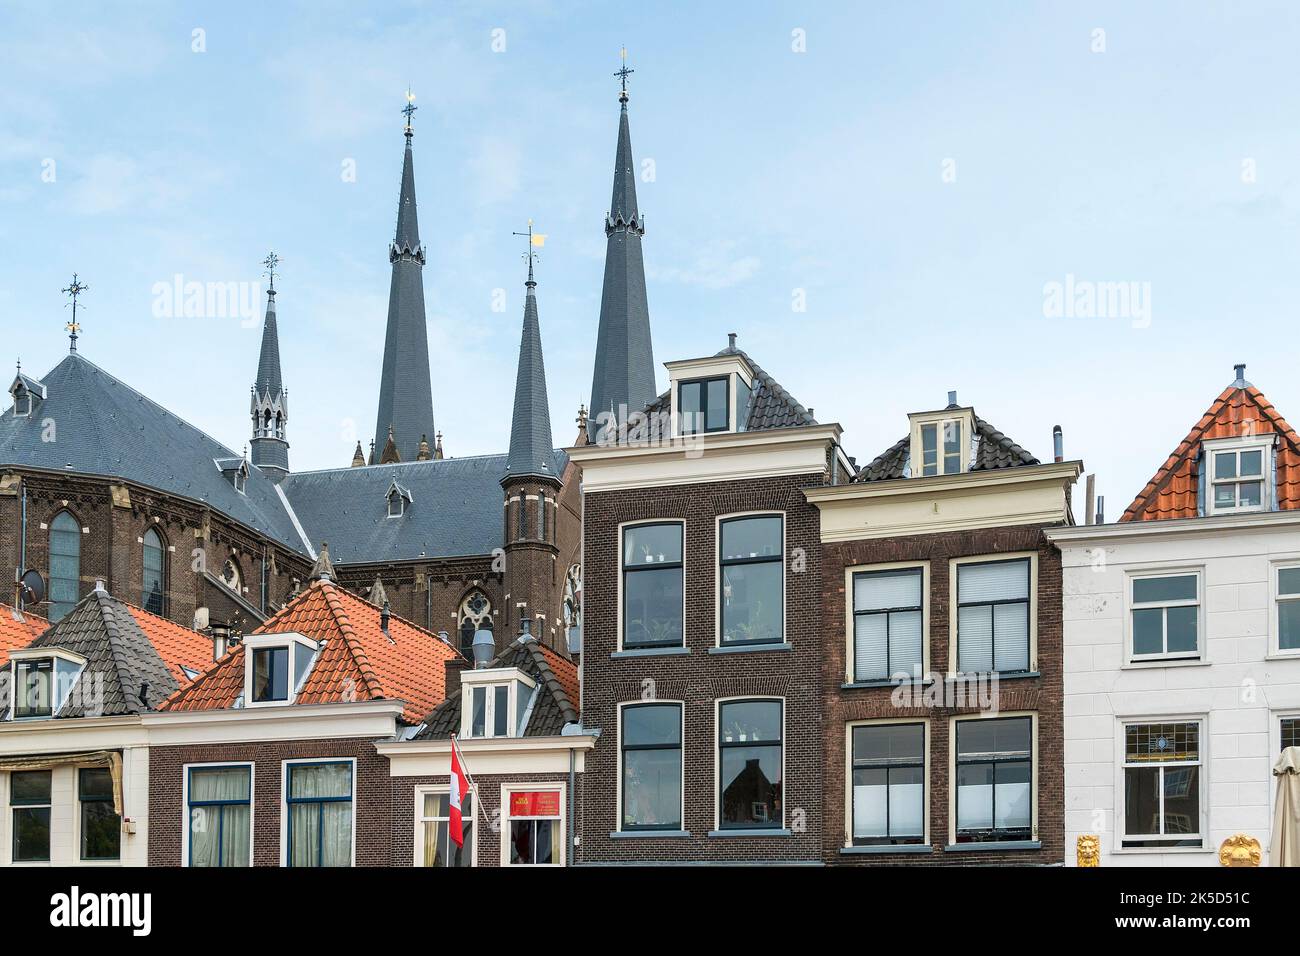 Delft (Netherlands), large market square, patrician houses Stock Photo